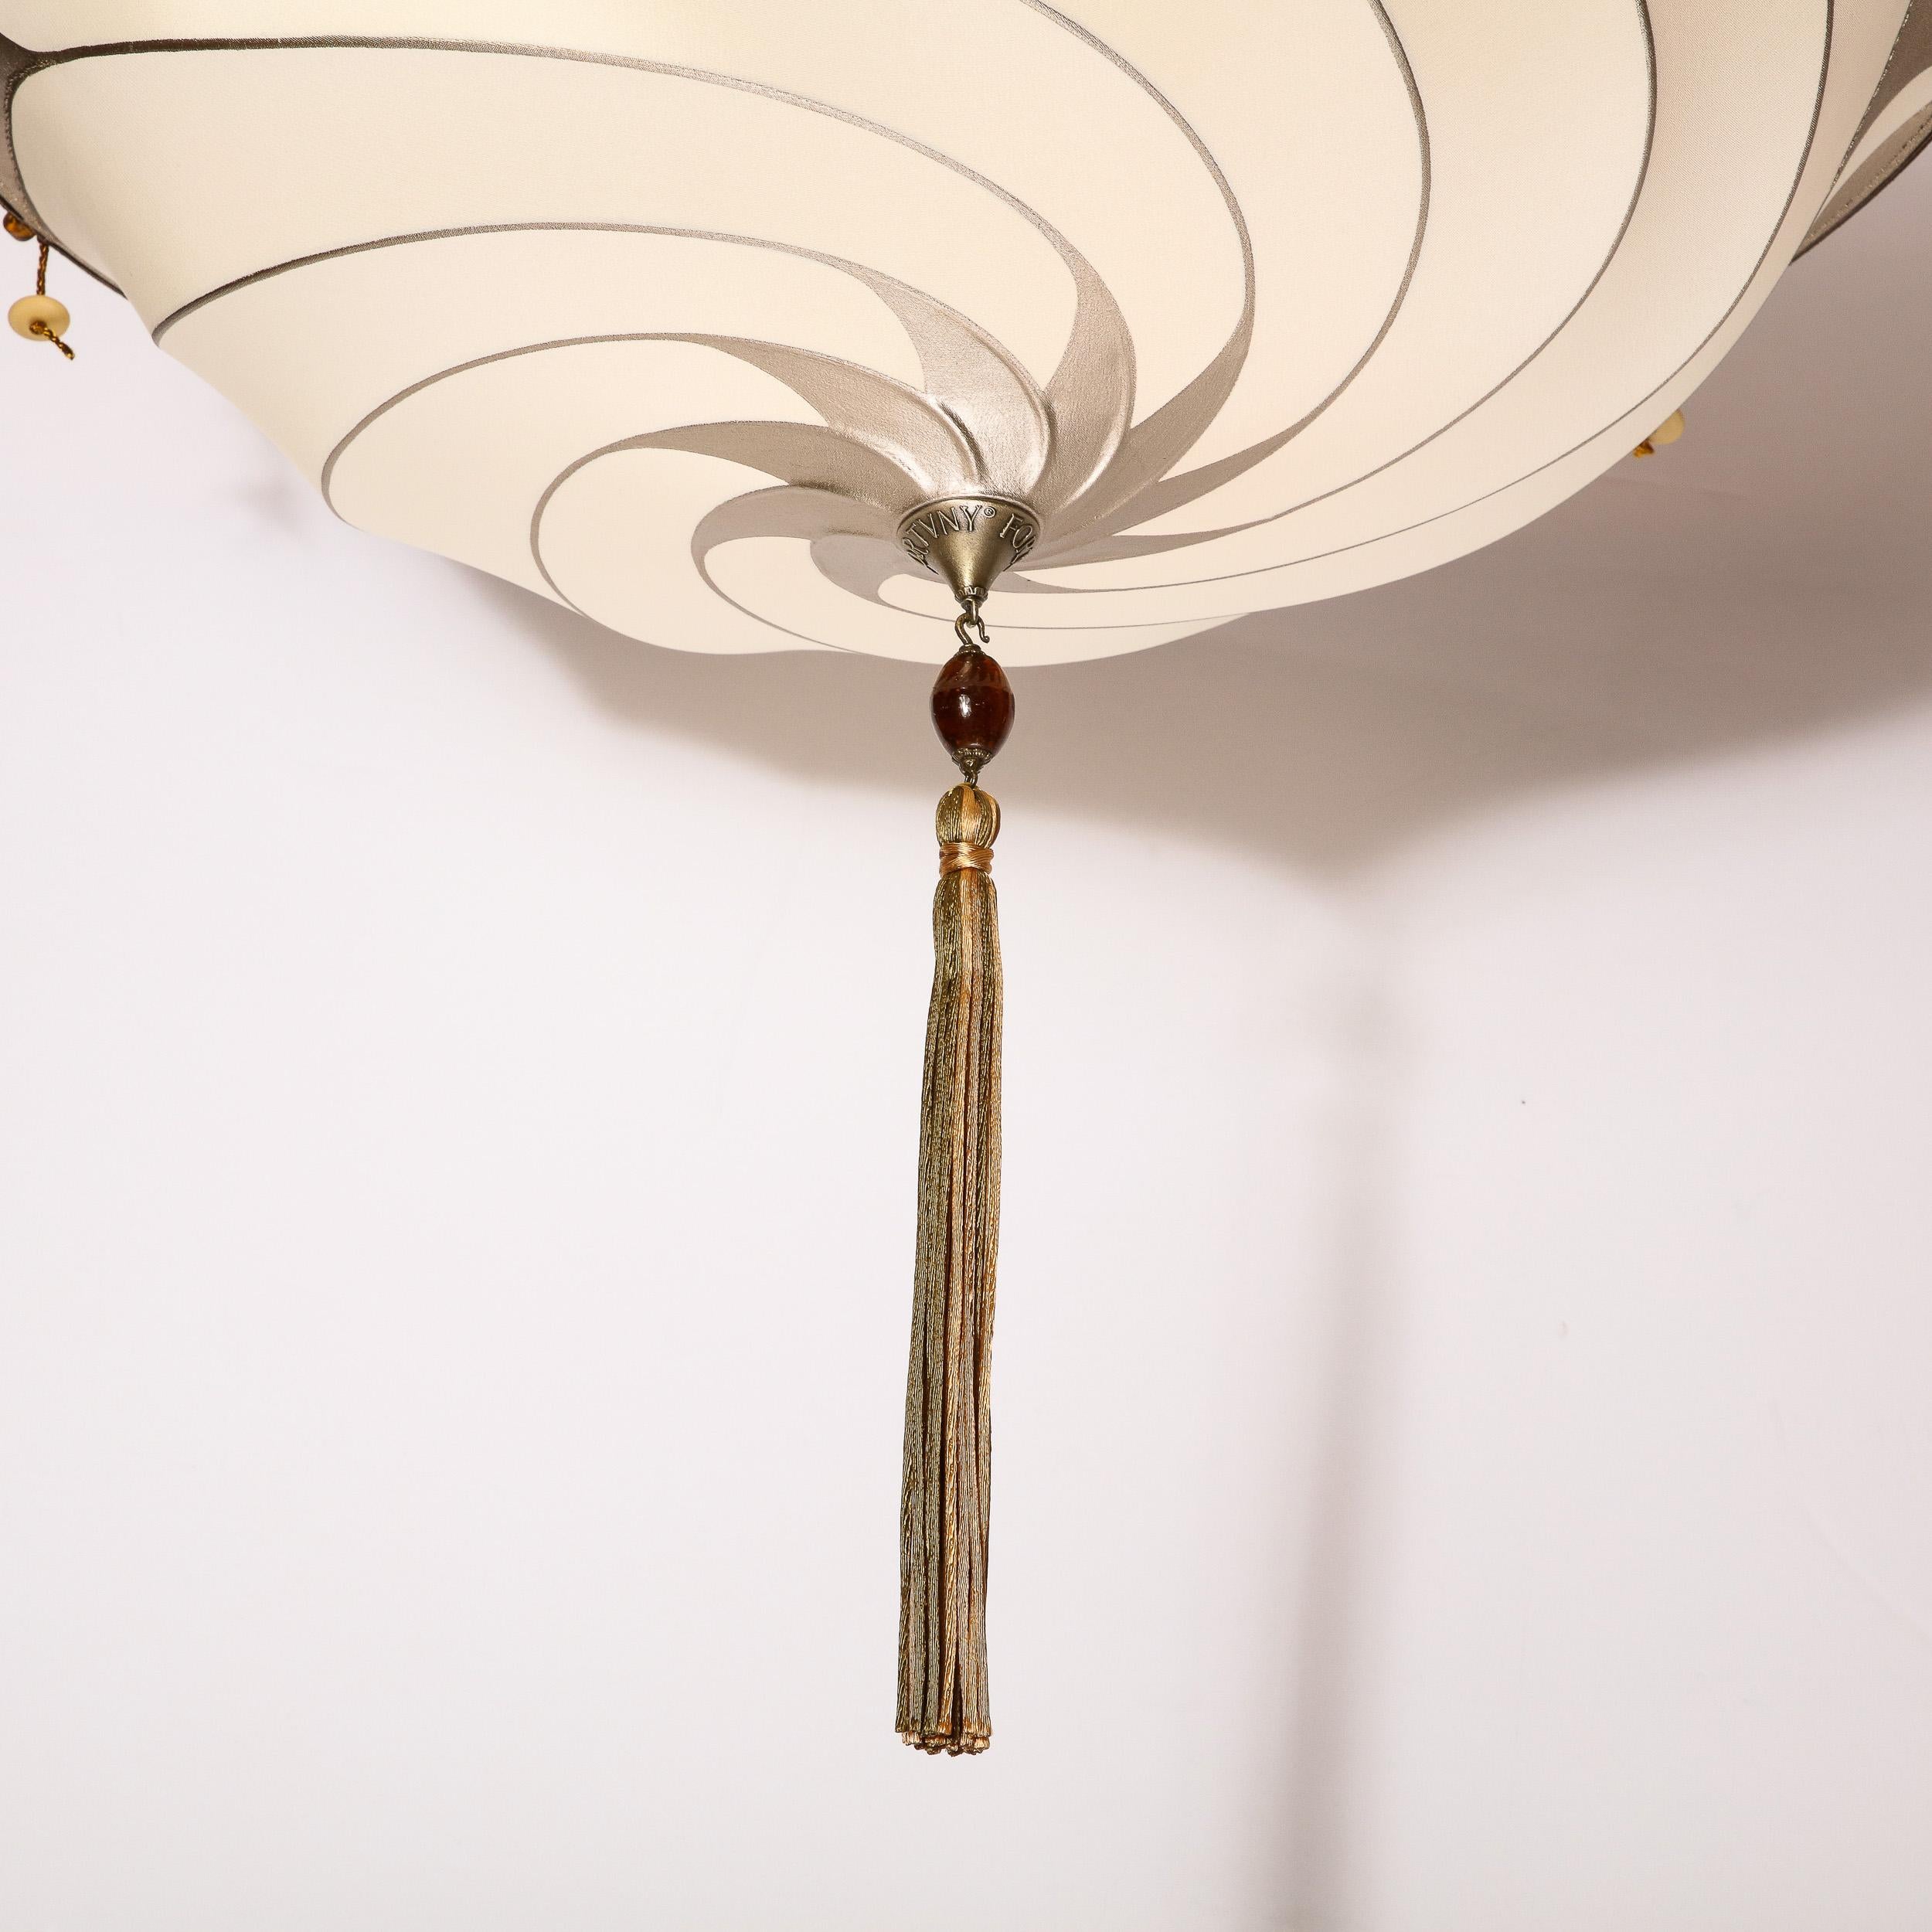 This elegant modernist Saracen shield chandelier was realized by the esteemed maker Fortuny during the latter half of the 20th century in Italy. It features a domed concave fabric shade emblazoned with swirling white gold striated detailing